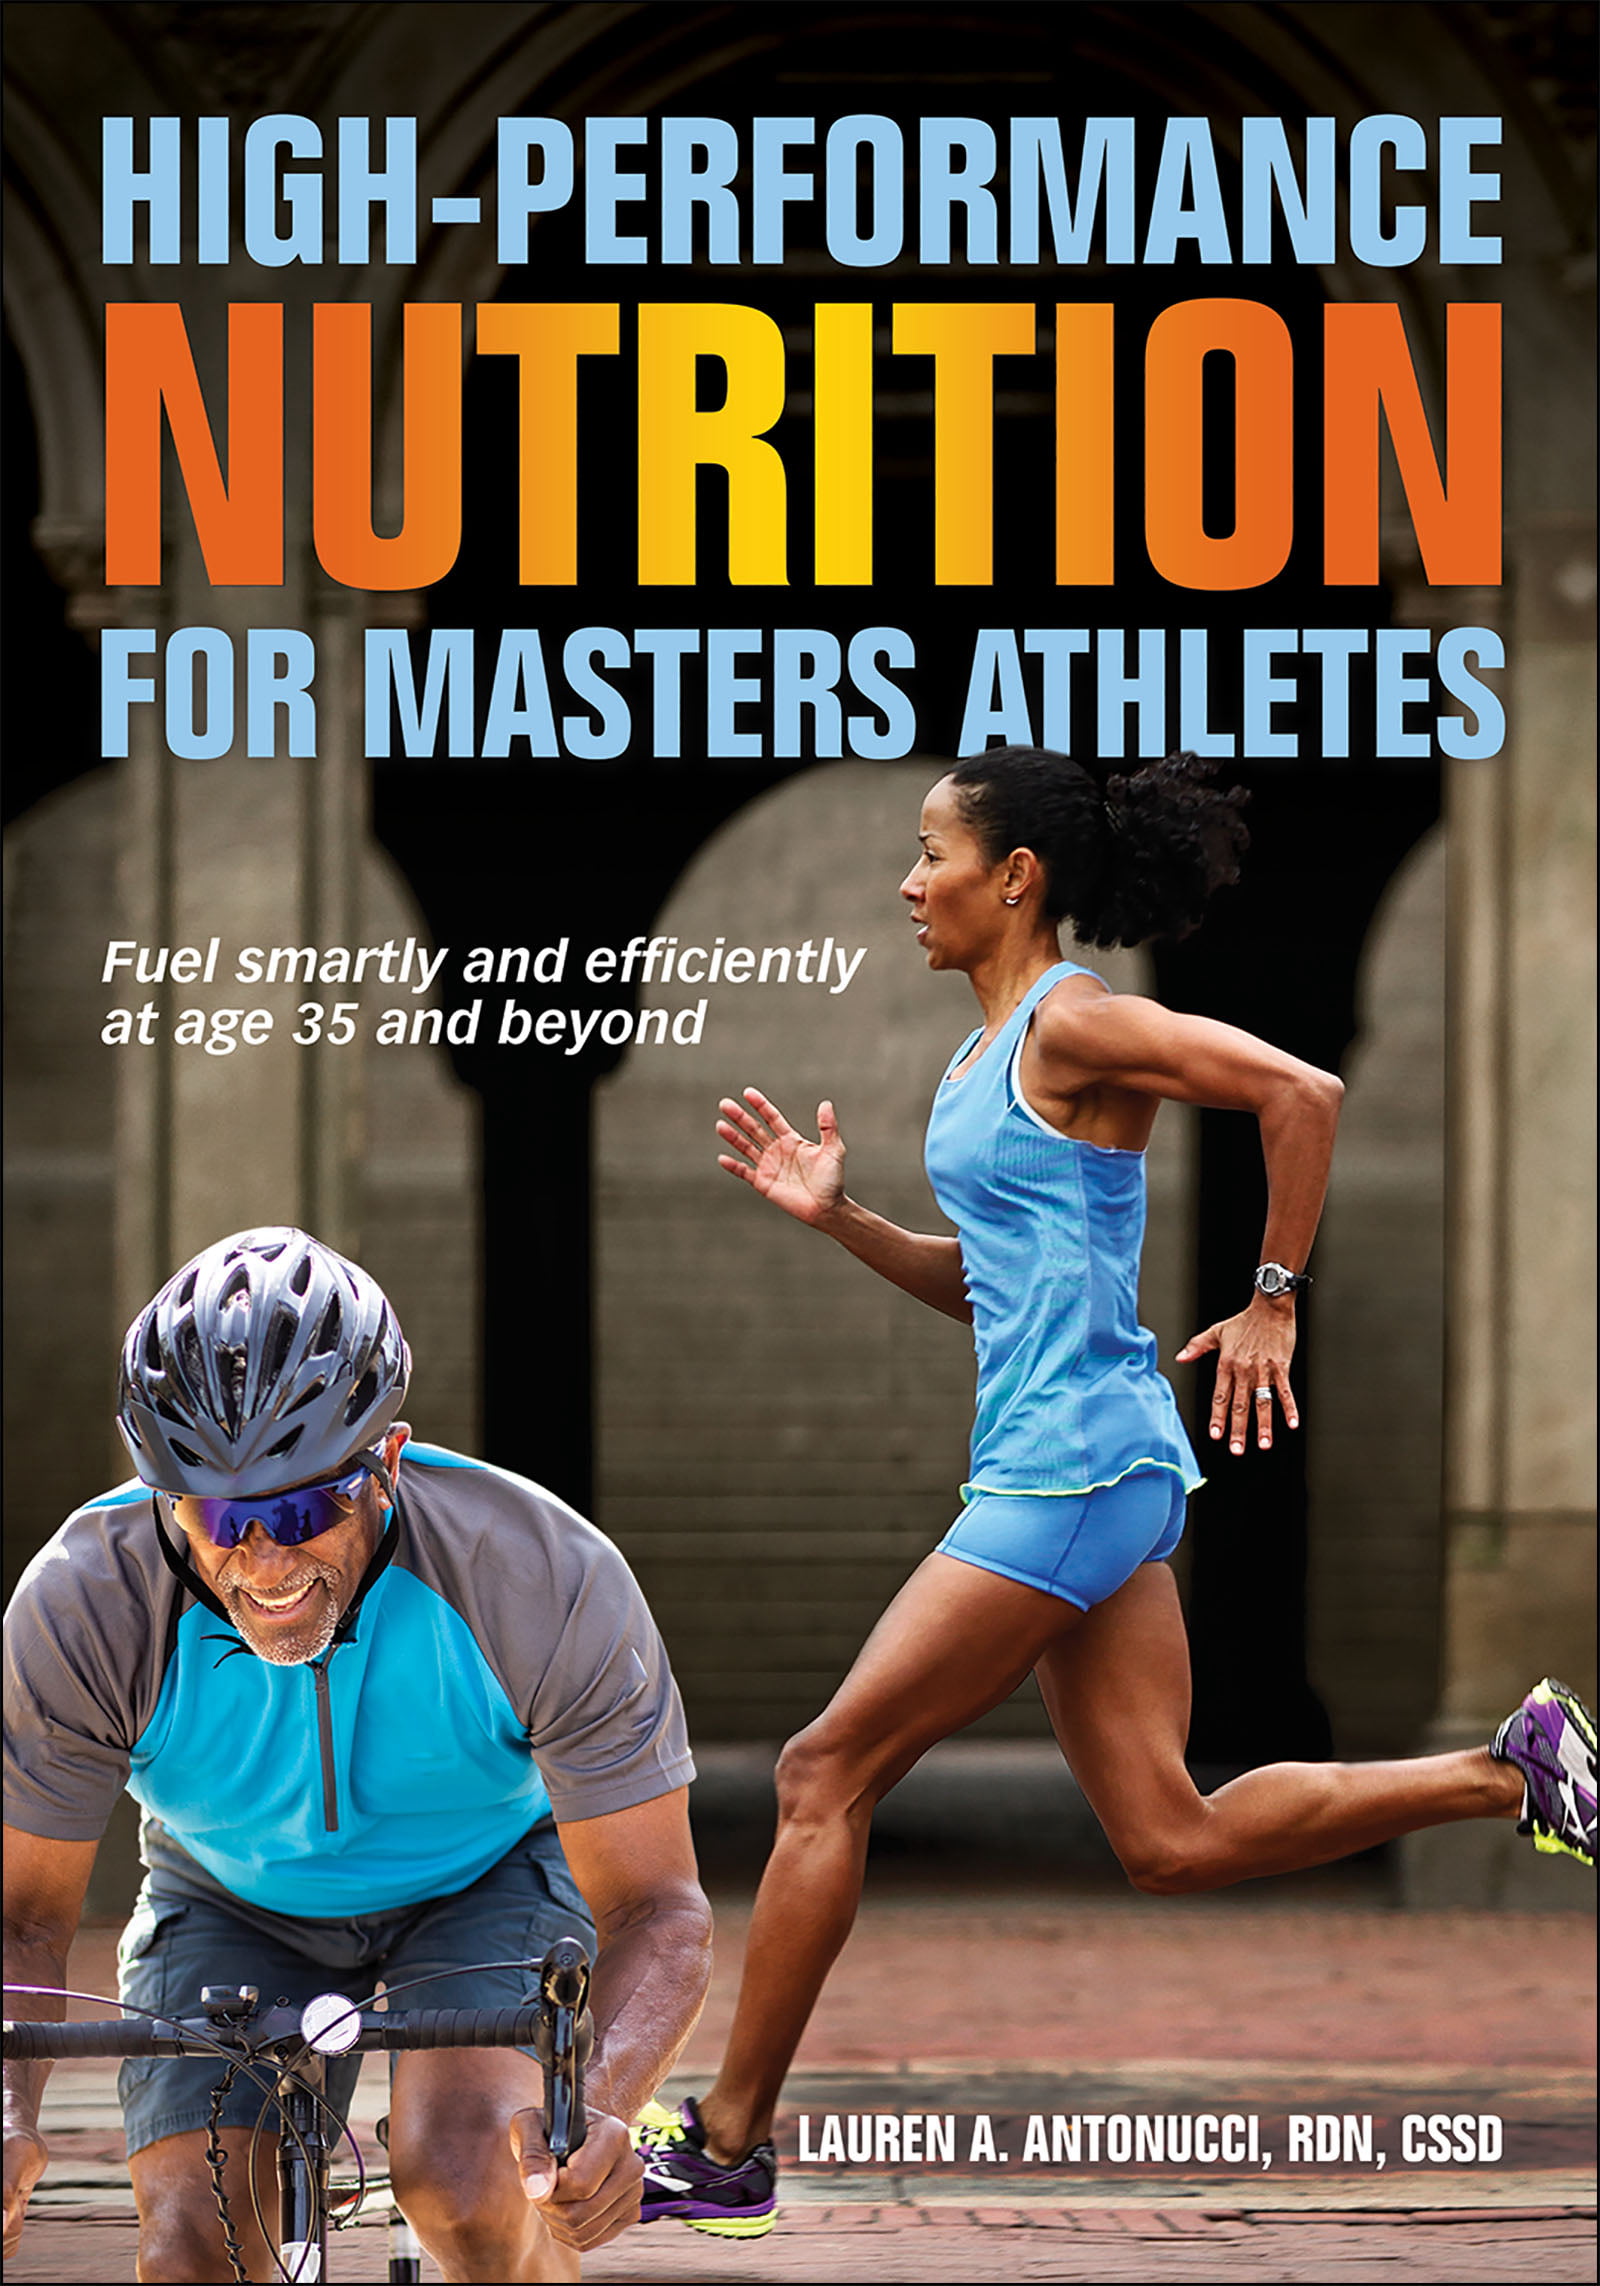 Athlete-friendly performance nutrition